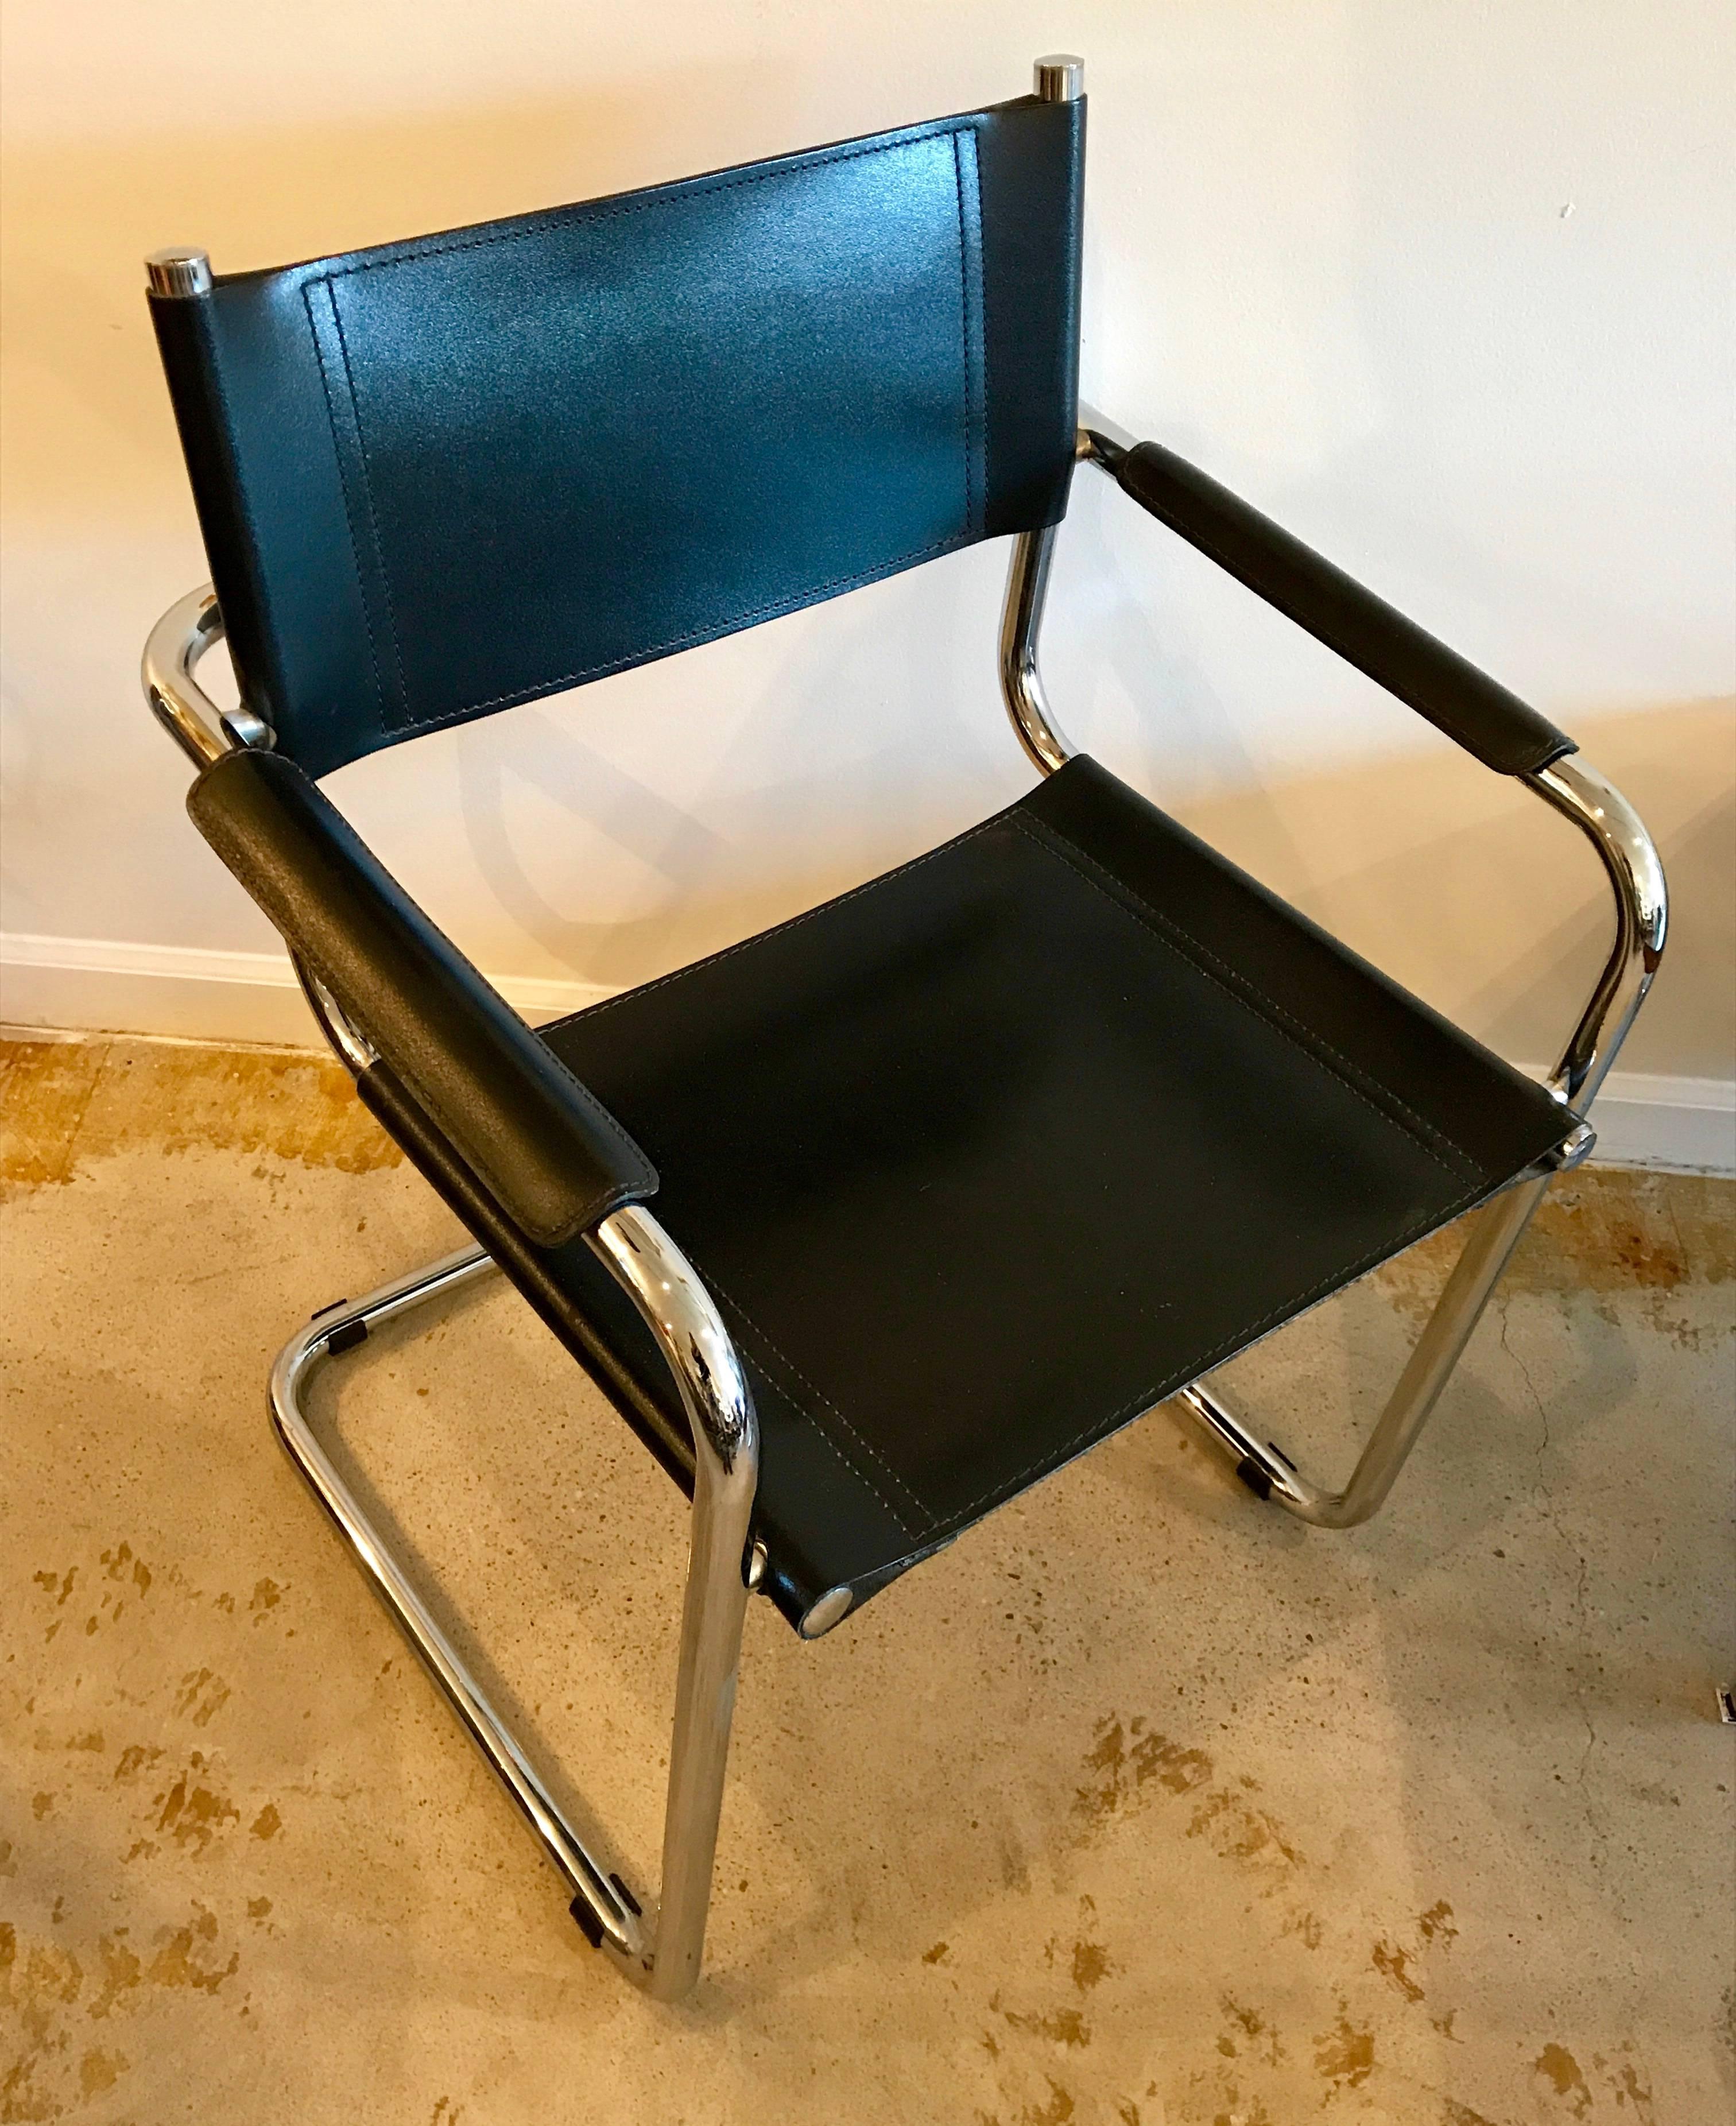 Set of four iconic cantilevered armchairs of chrome tubular steel with black leather sling seat and back and black leather armrests in near pristine condition. Designed by Mart Stam in 1927, chairs of this style were the first cantilevered chairs in